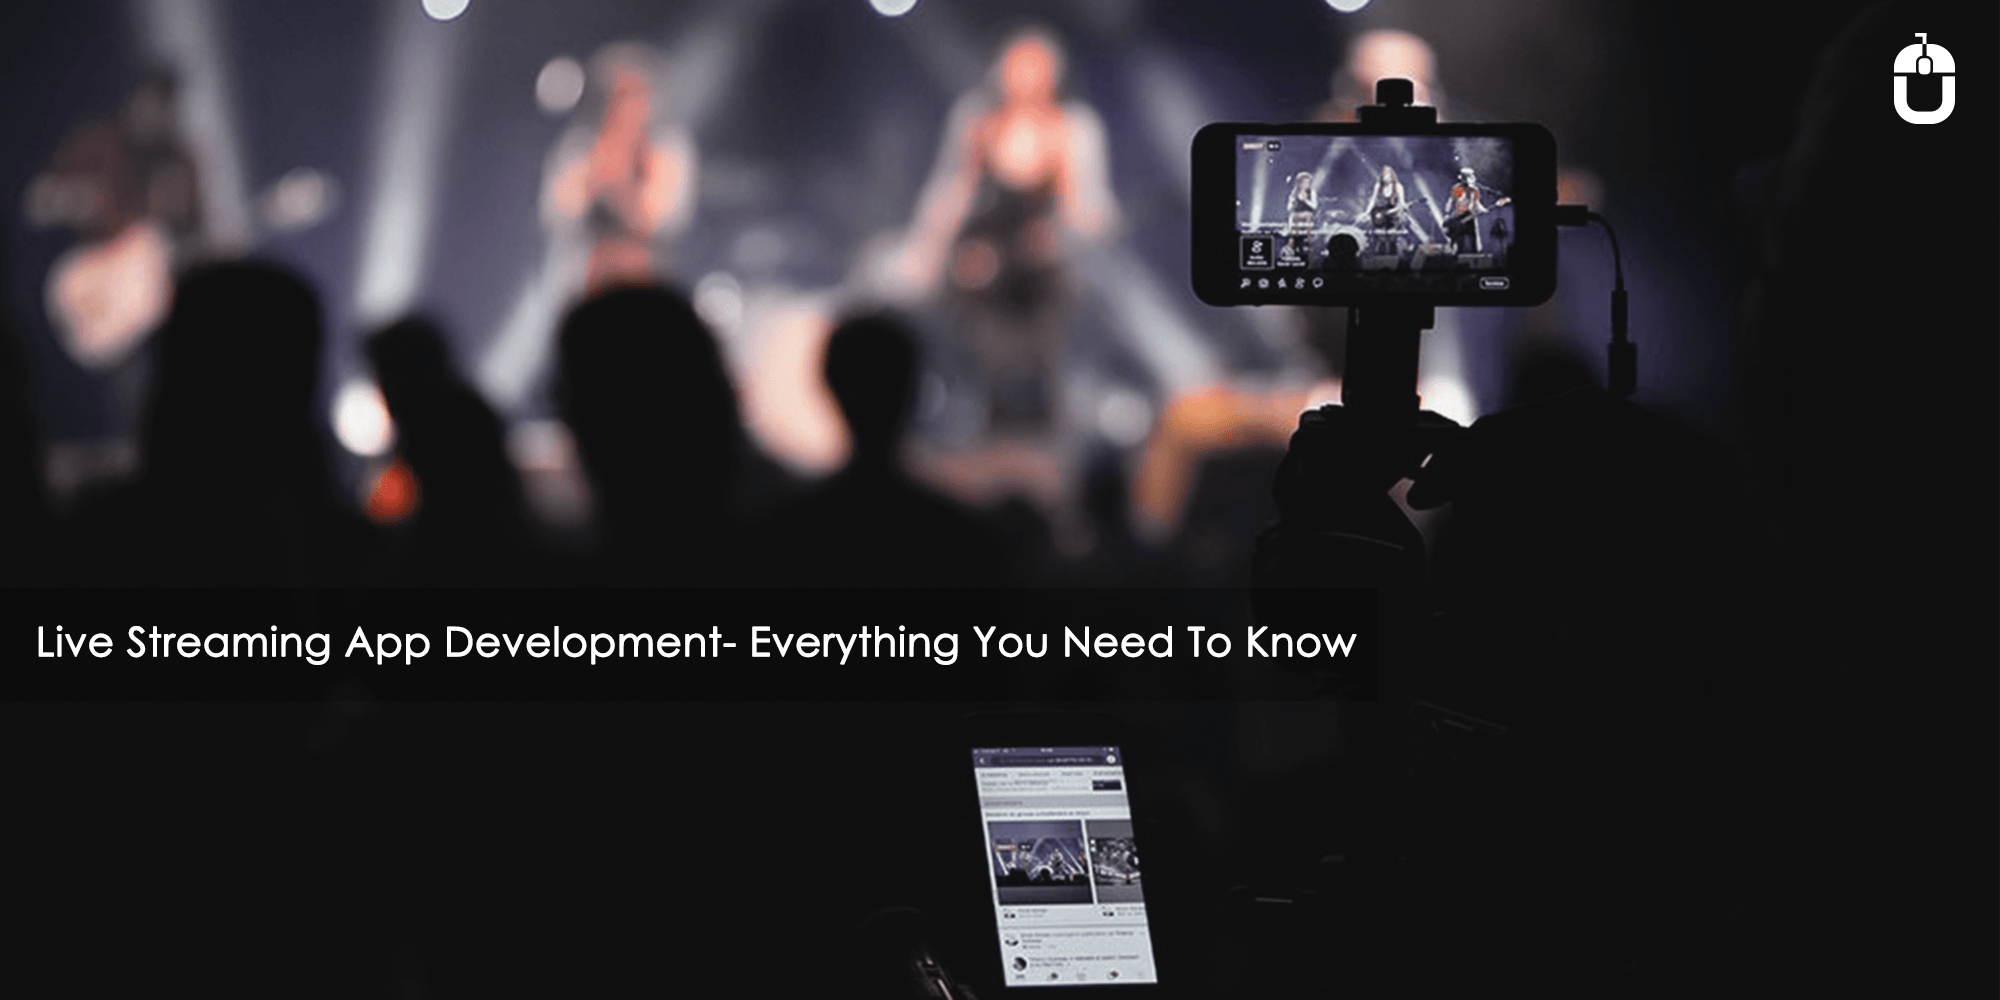 Live Streaming App Development- Everything You Need To Know